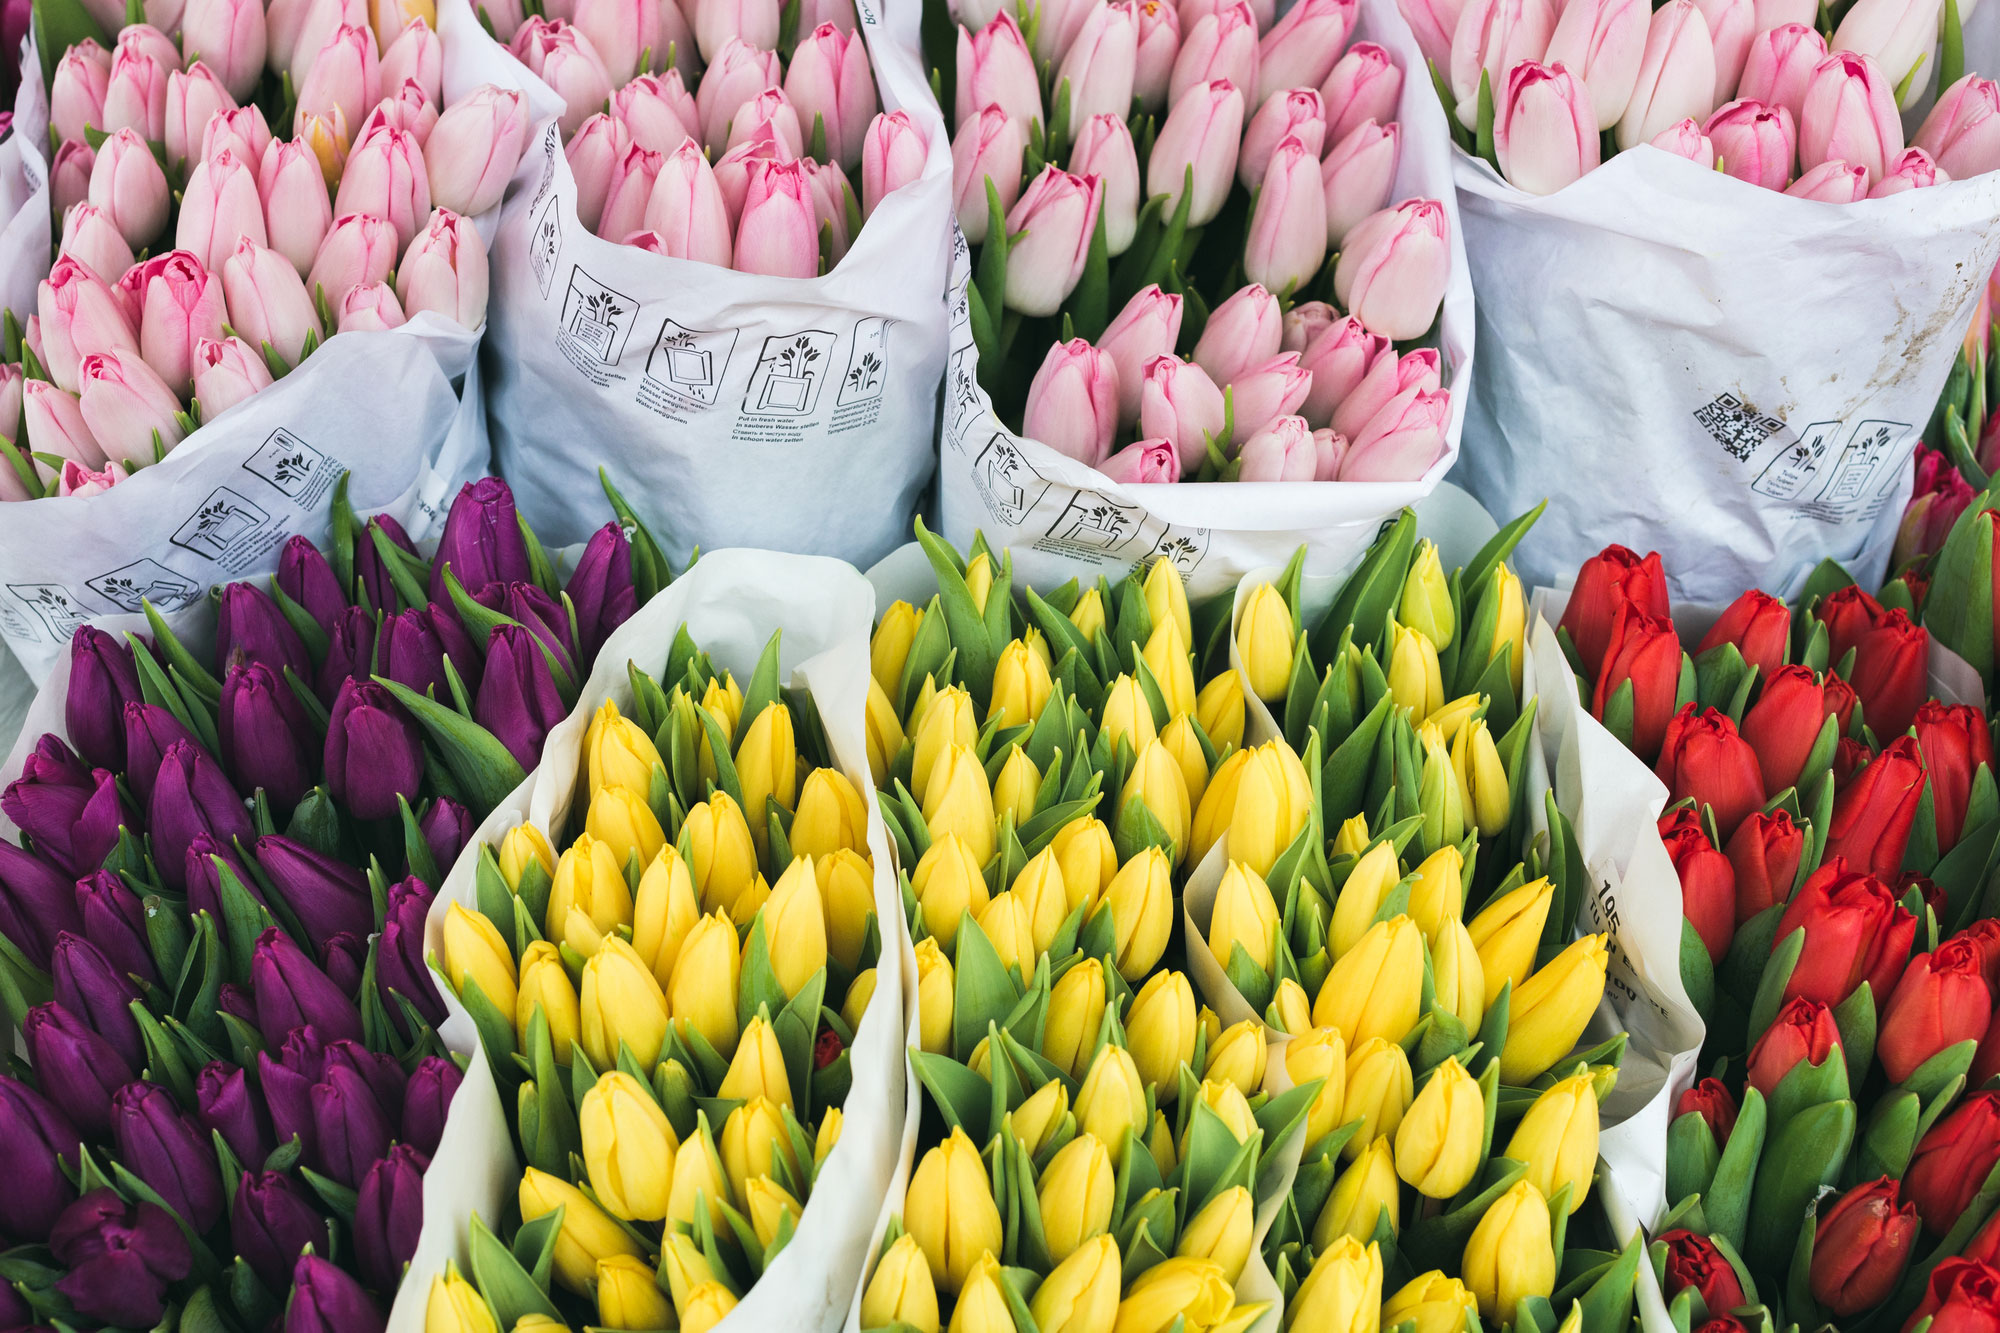 Visit the flower market at Mons for a spectacular array of spring flowers